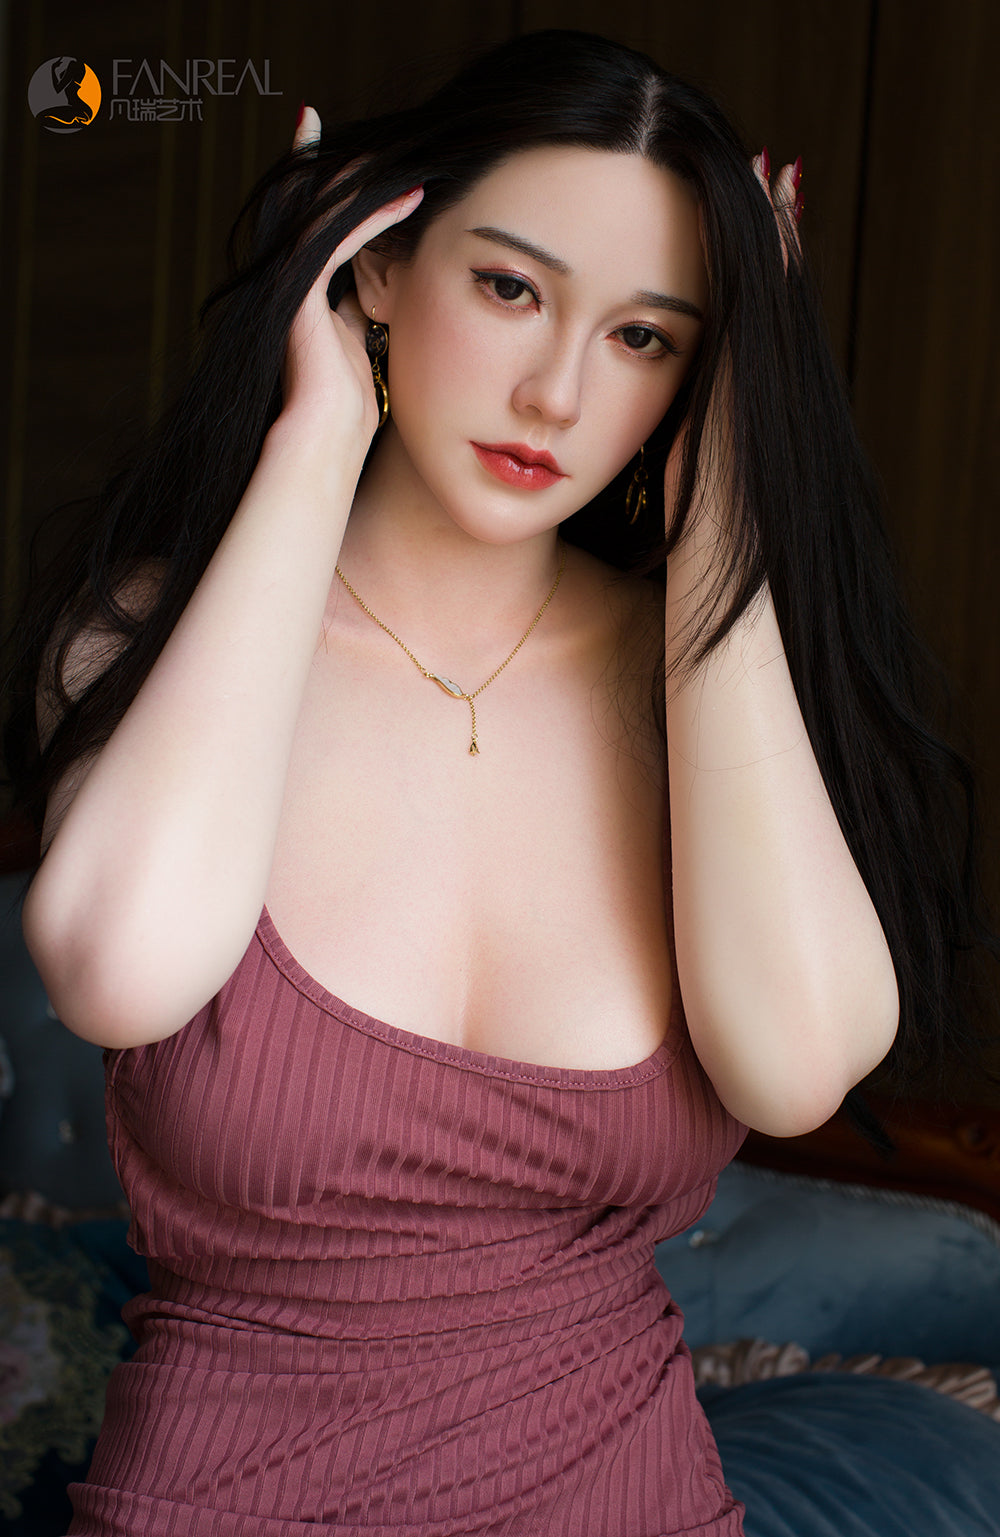 FANREAL DOLL 172 CM E Silicone - Weiwei | Buy Sex Dolls at DOLLS ACTUALLY